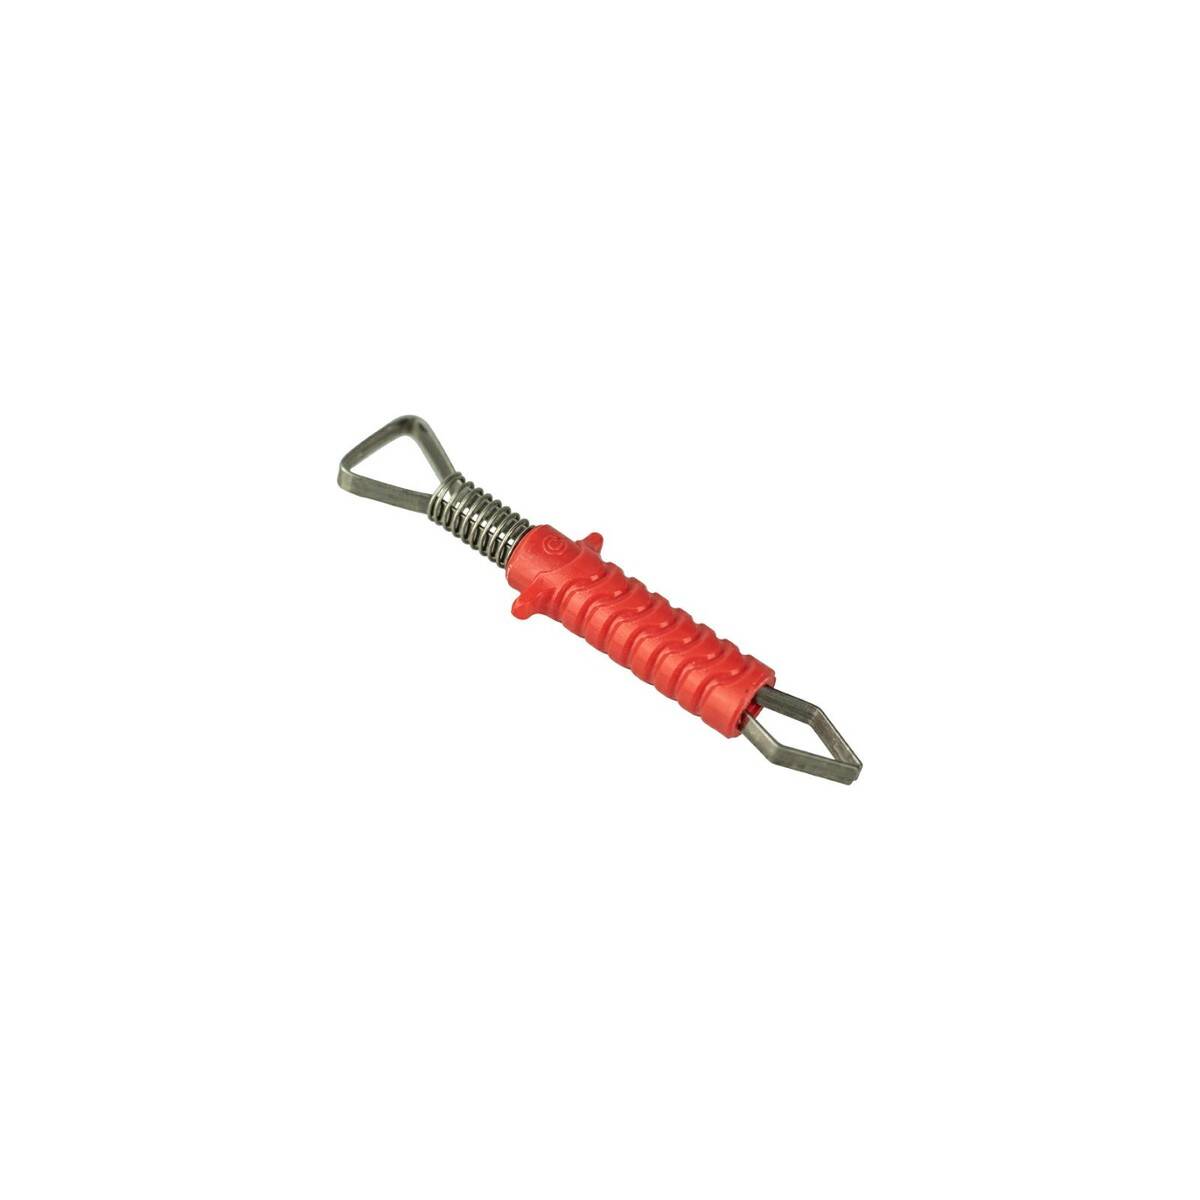 Pliers for removing ticks GS38 (Z-GS38RM)